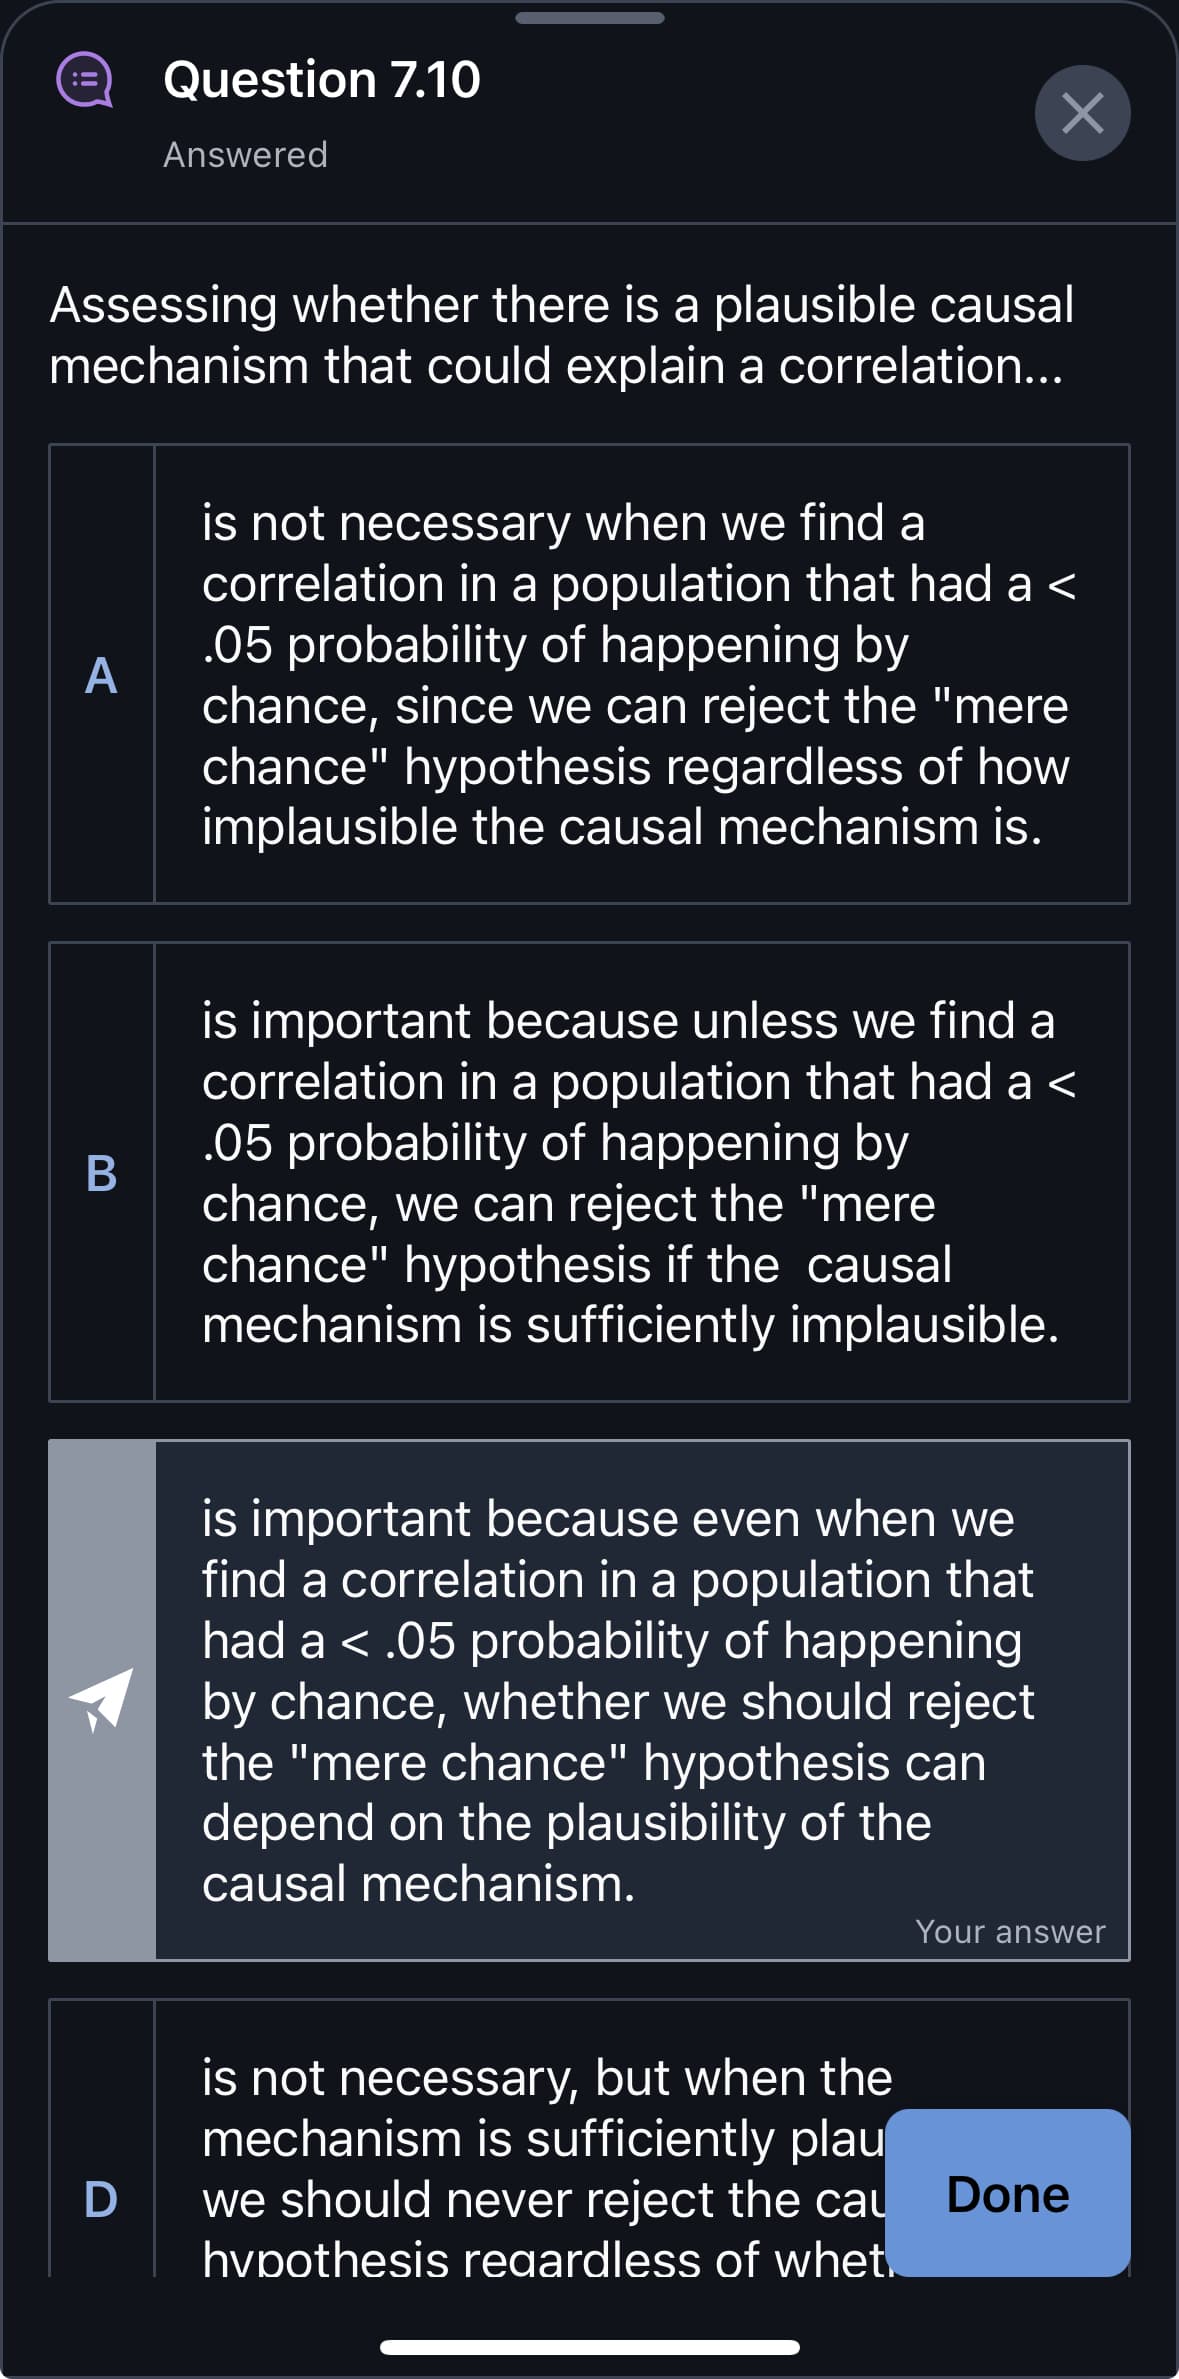 Question 7.10
Answered
Assessing whether there is a plausible causal
mechanism that could explain a correlation...
A
is not necessary when we find a
correlation in a population that had a <
.05 probability of happening by
chance, since we can reject the "mere
chance" hypothesis regardless of how
implausible the causal mechanism is.
B
D
is important because unless we find a
correlation in a population that had a <
.05 probability of happening by
chance, we can reject the "mere
chance" hypothesis if the causal
mechanism is sufficiently implausible.
is important because even when we
find a correlation in a population that
had a < .05 probability of happening
by chance, whether we should reject
the "mere chance" hypothesis can
depend on the plausibility of the
causal mechanism.
Your answer
is not necessary, but when the
mechanism is sufficiently plau
we should never reject the cau
hypothesis regardless of whet.
Done